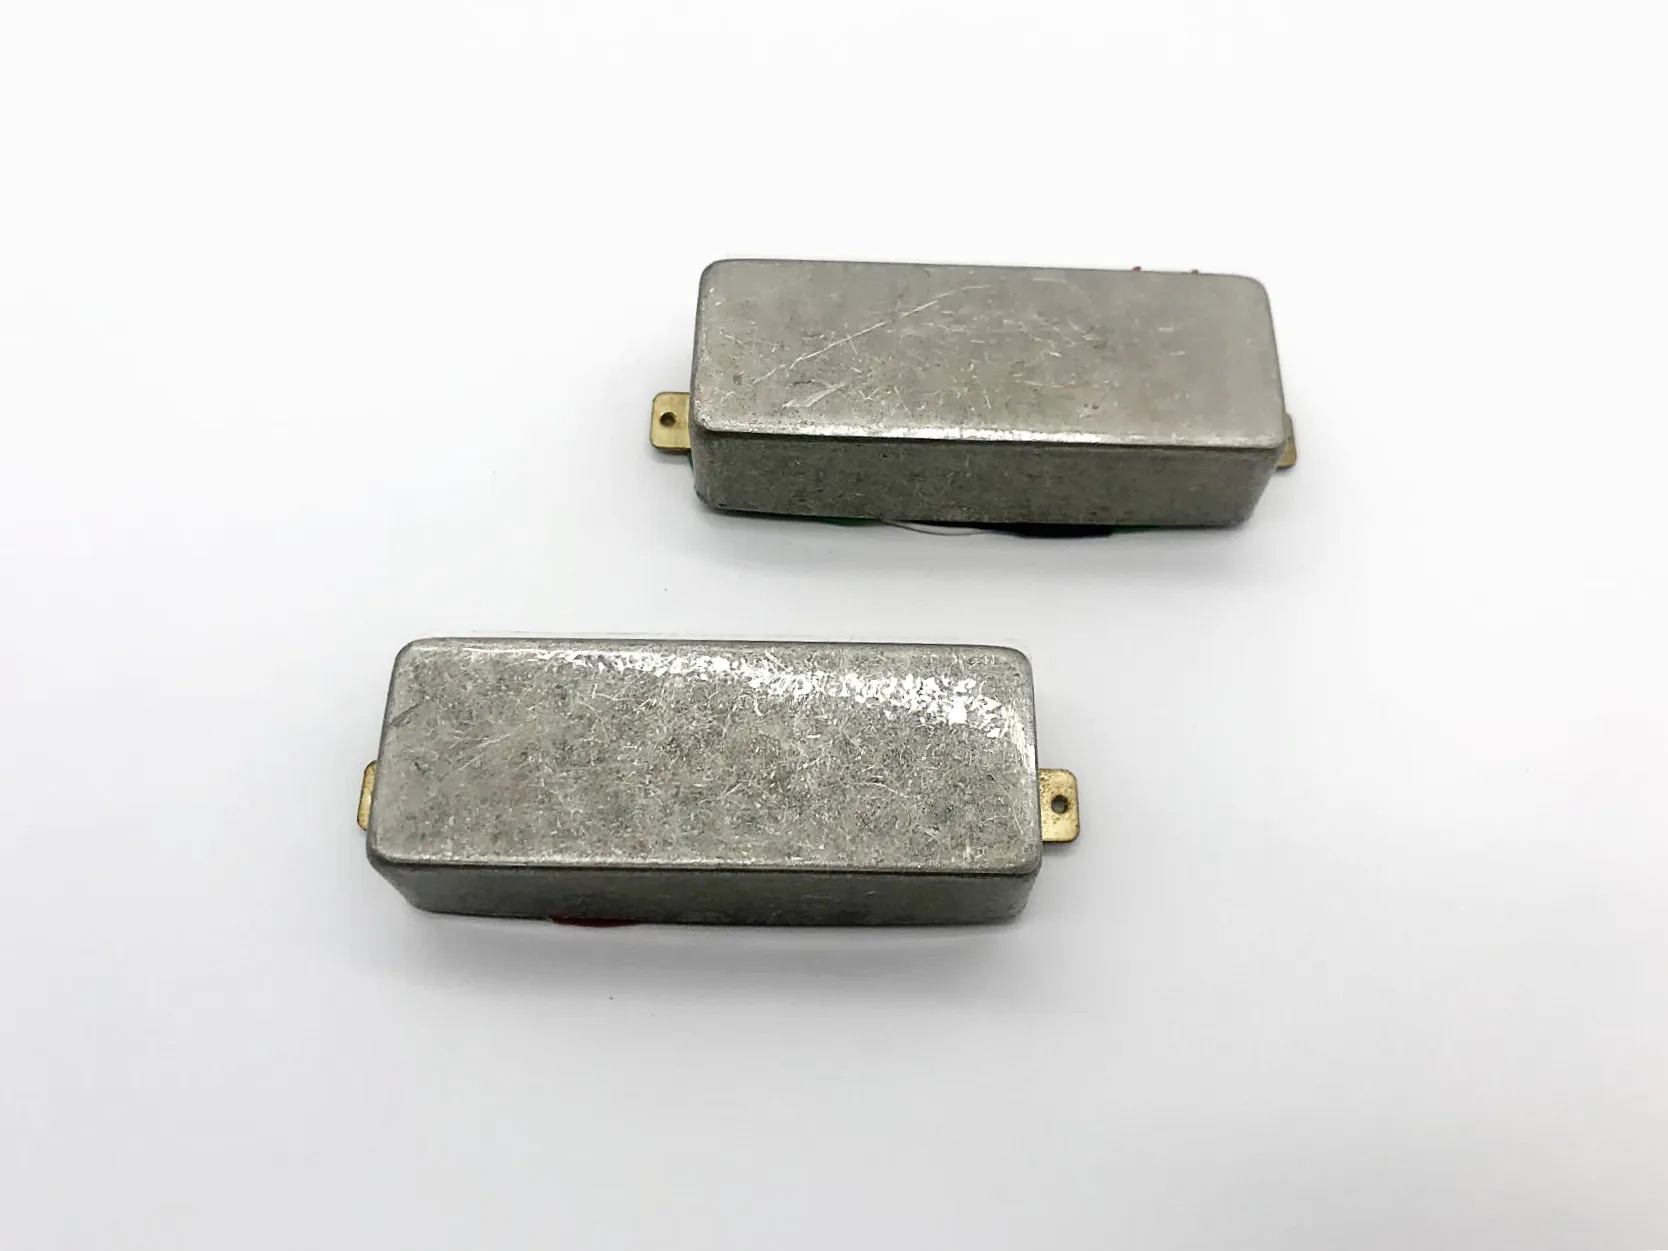 

Genuine 1 Set of Classic Etile Relic Antique Nickel Pickups for 4 Strings Electric Bass Guitar Accessories Made in Korea #P206